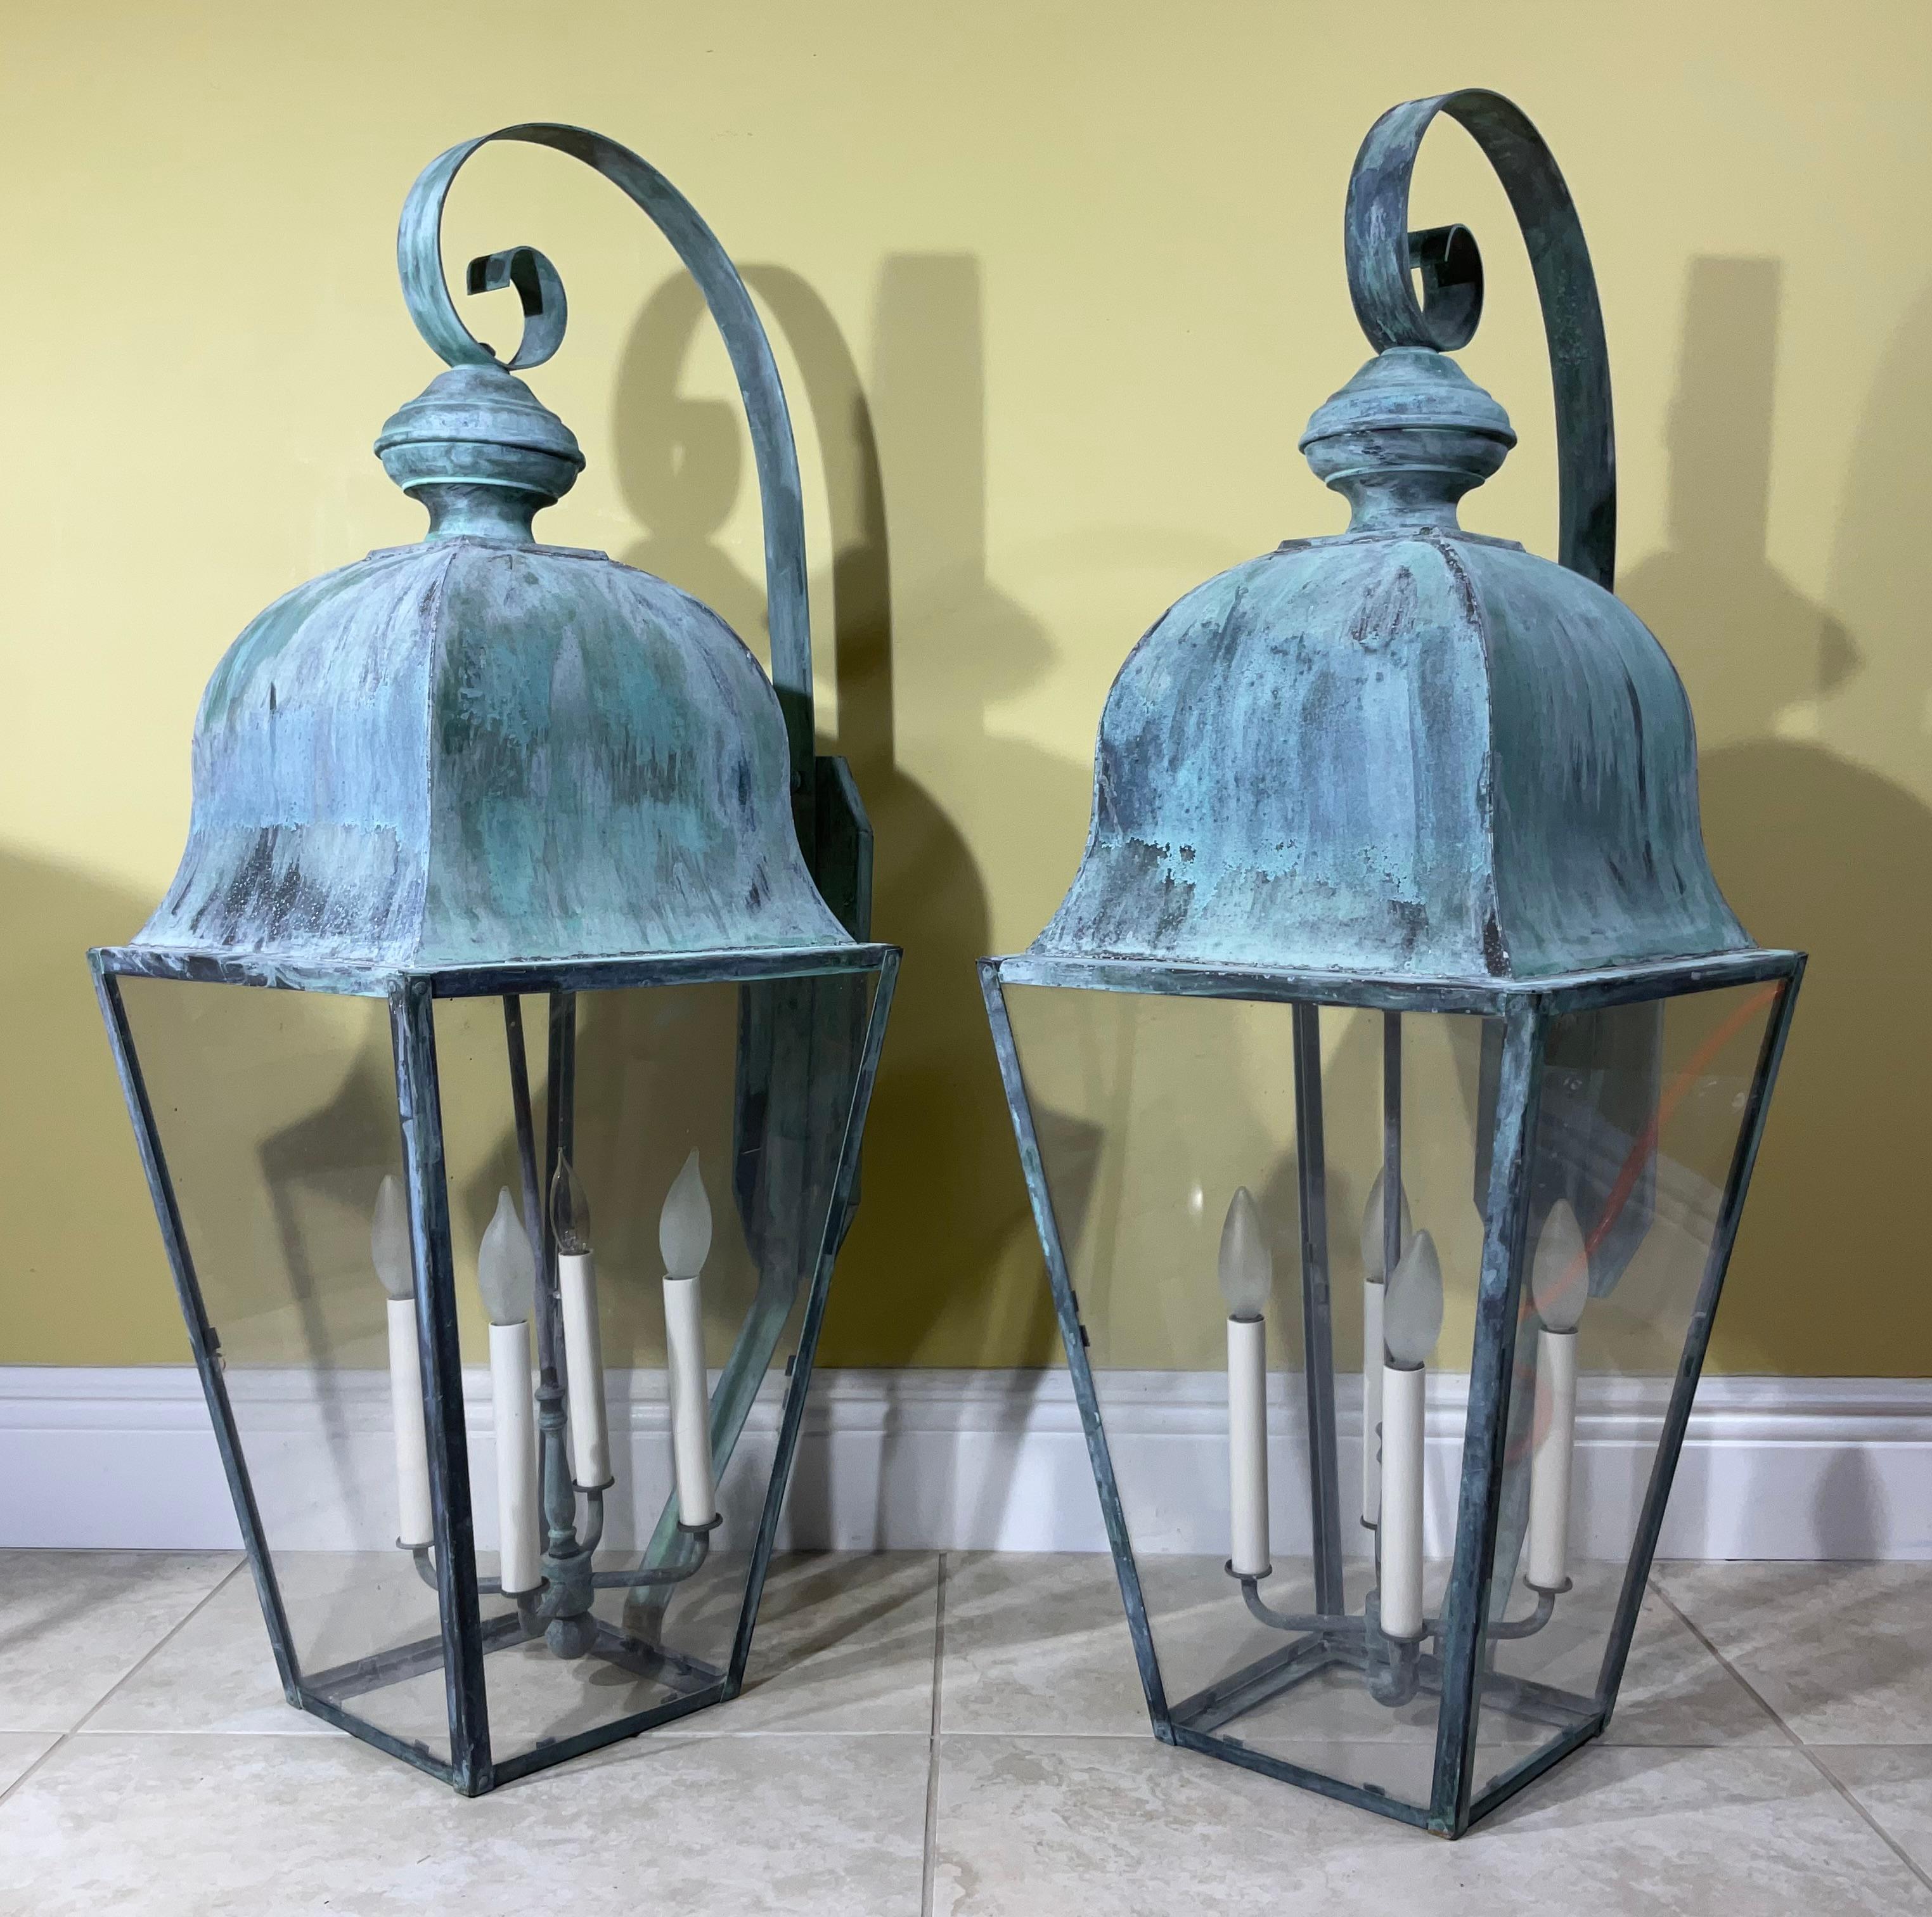 20th Century Large Pair of Vintage Handcrafted Wall-Mounted Solid Brass Lantern